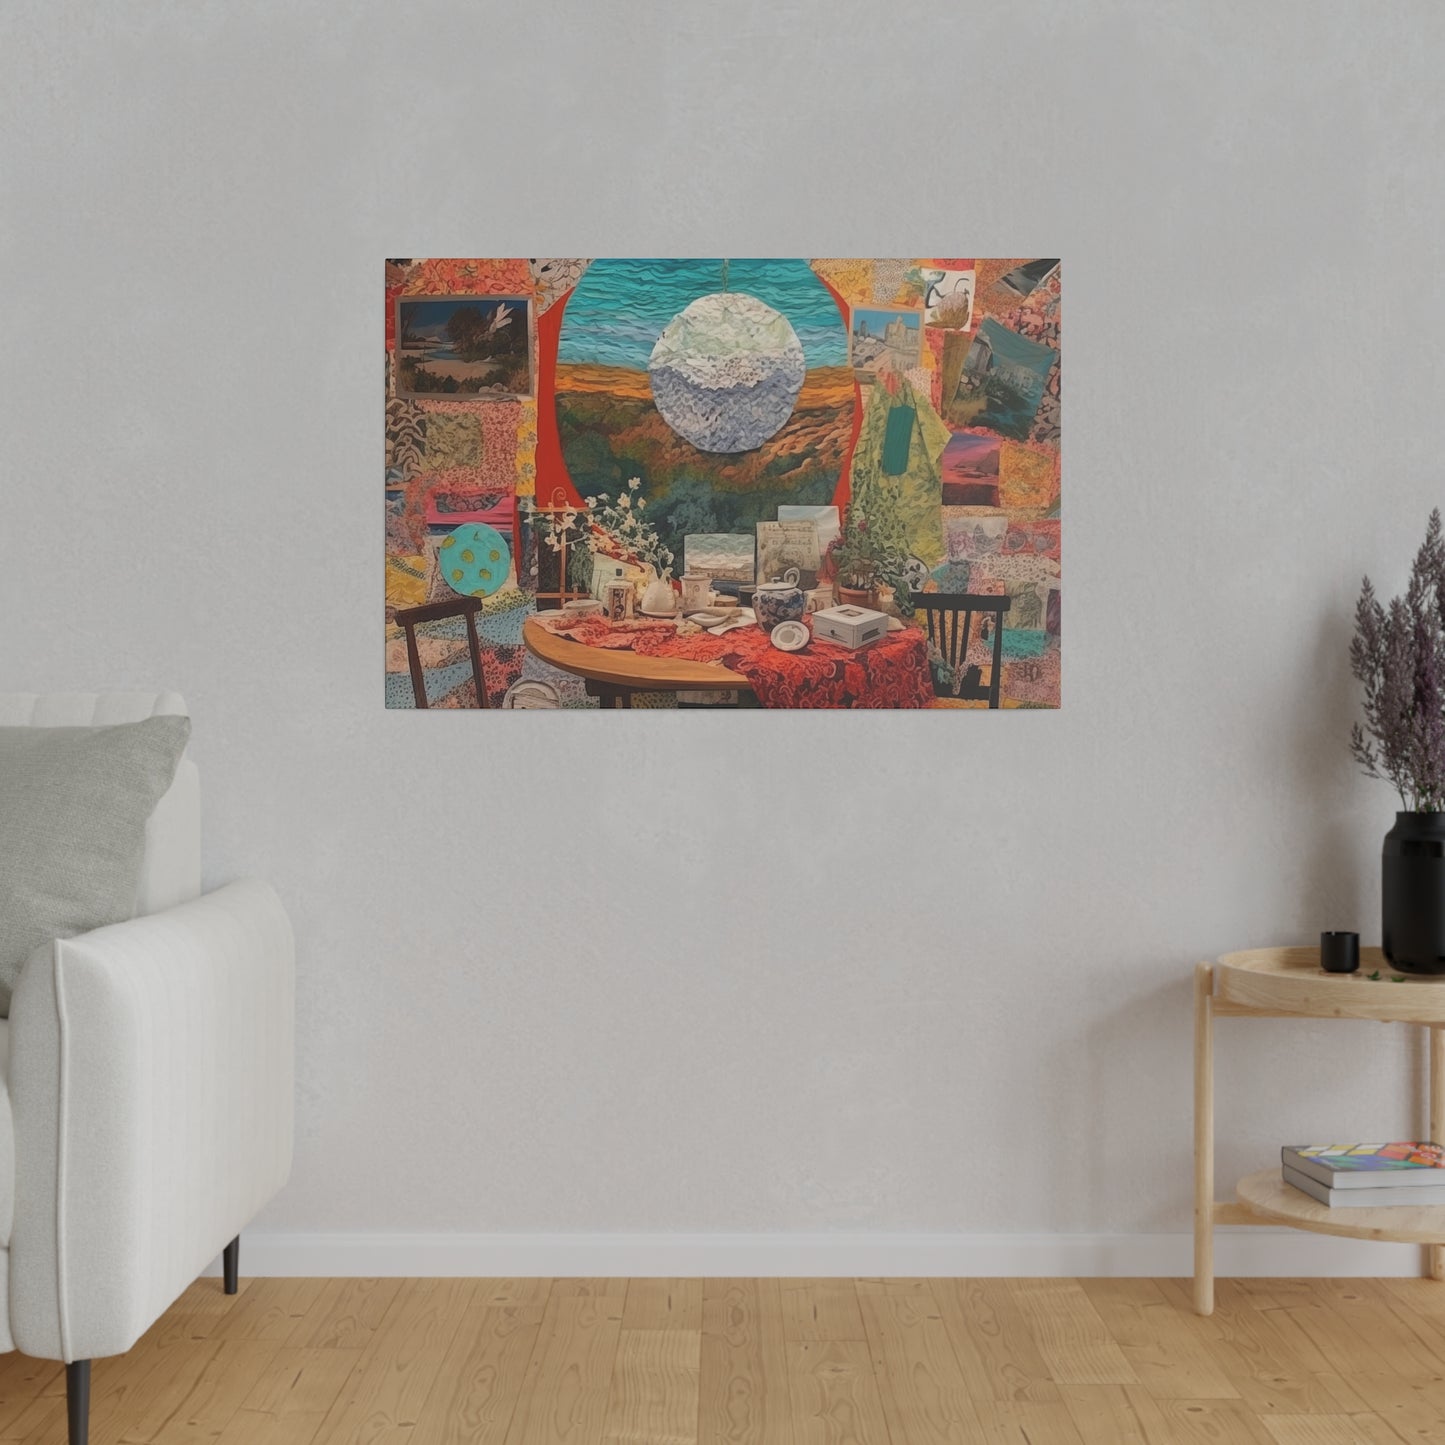 A Symphony of Textures: Mixed Media and Collage Canvas Art